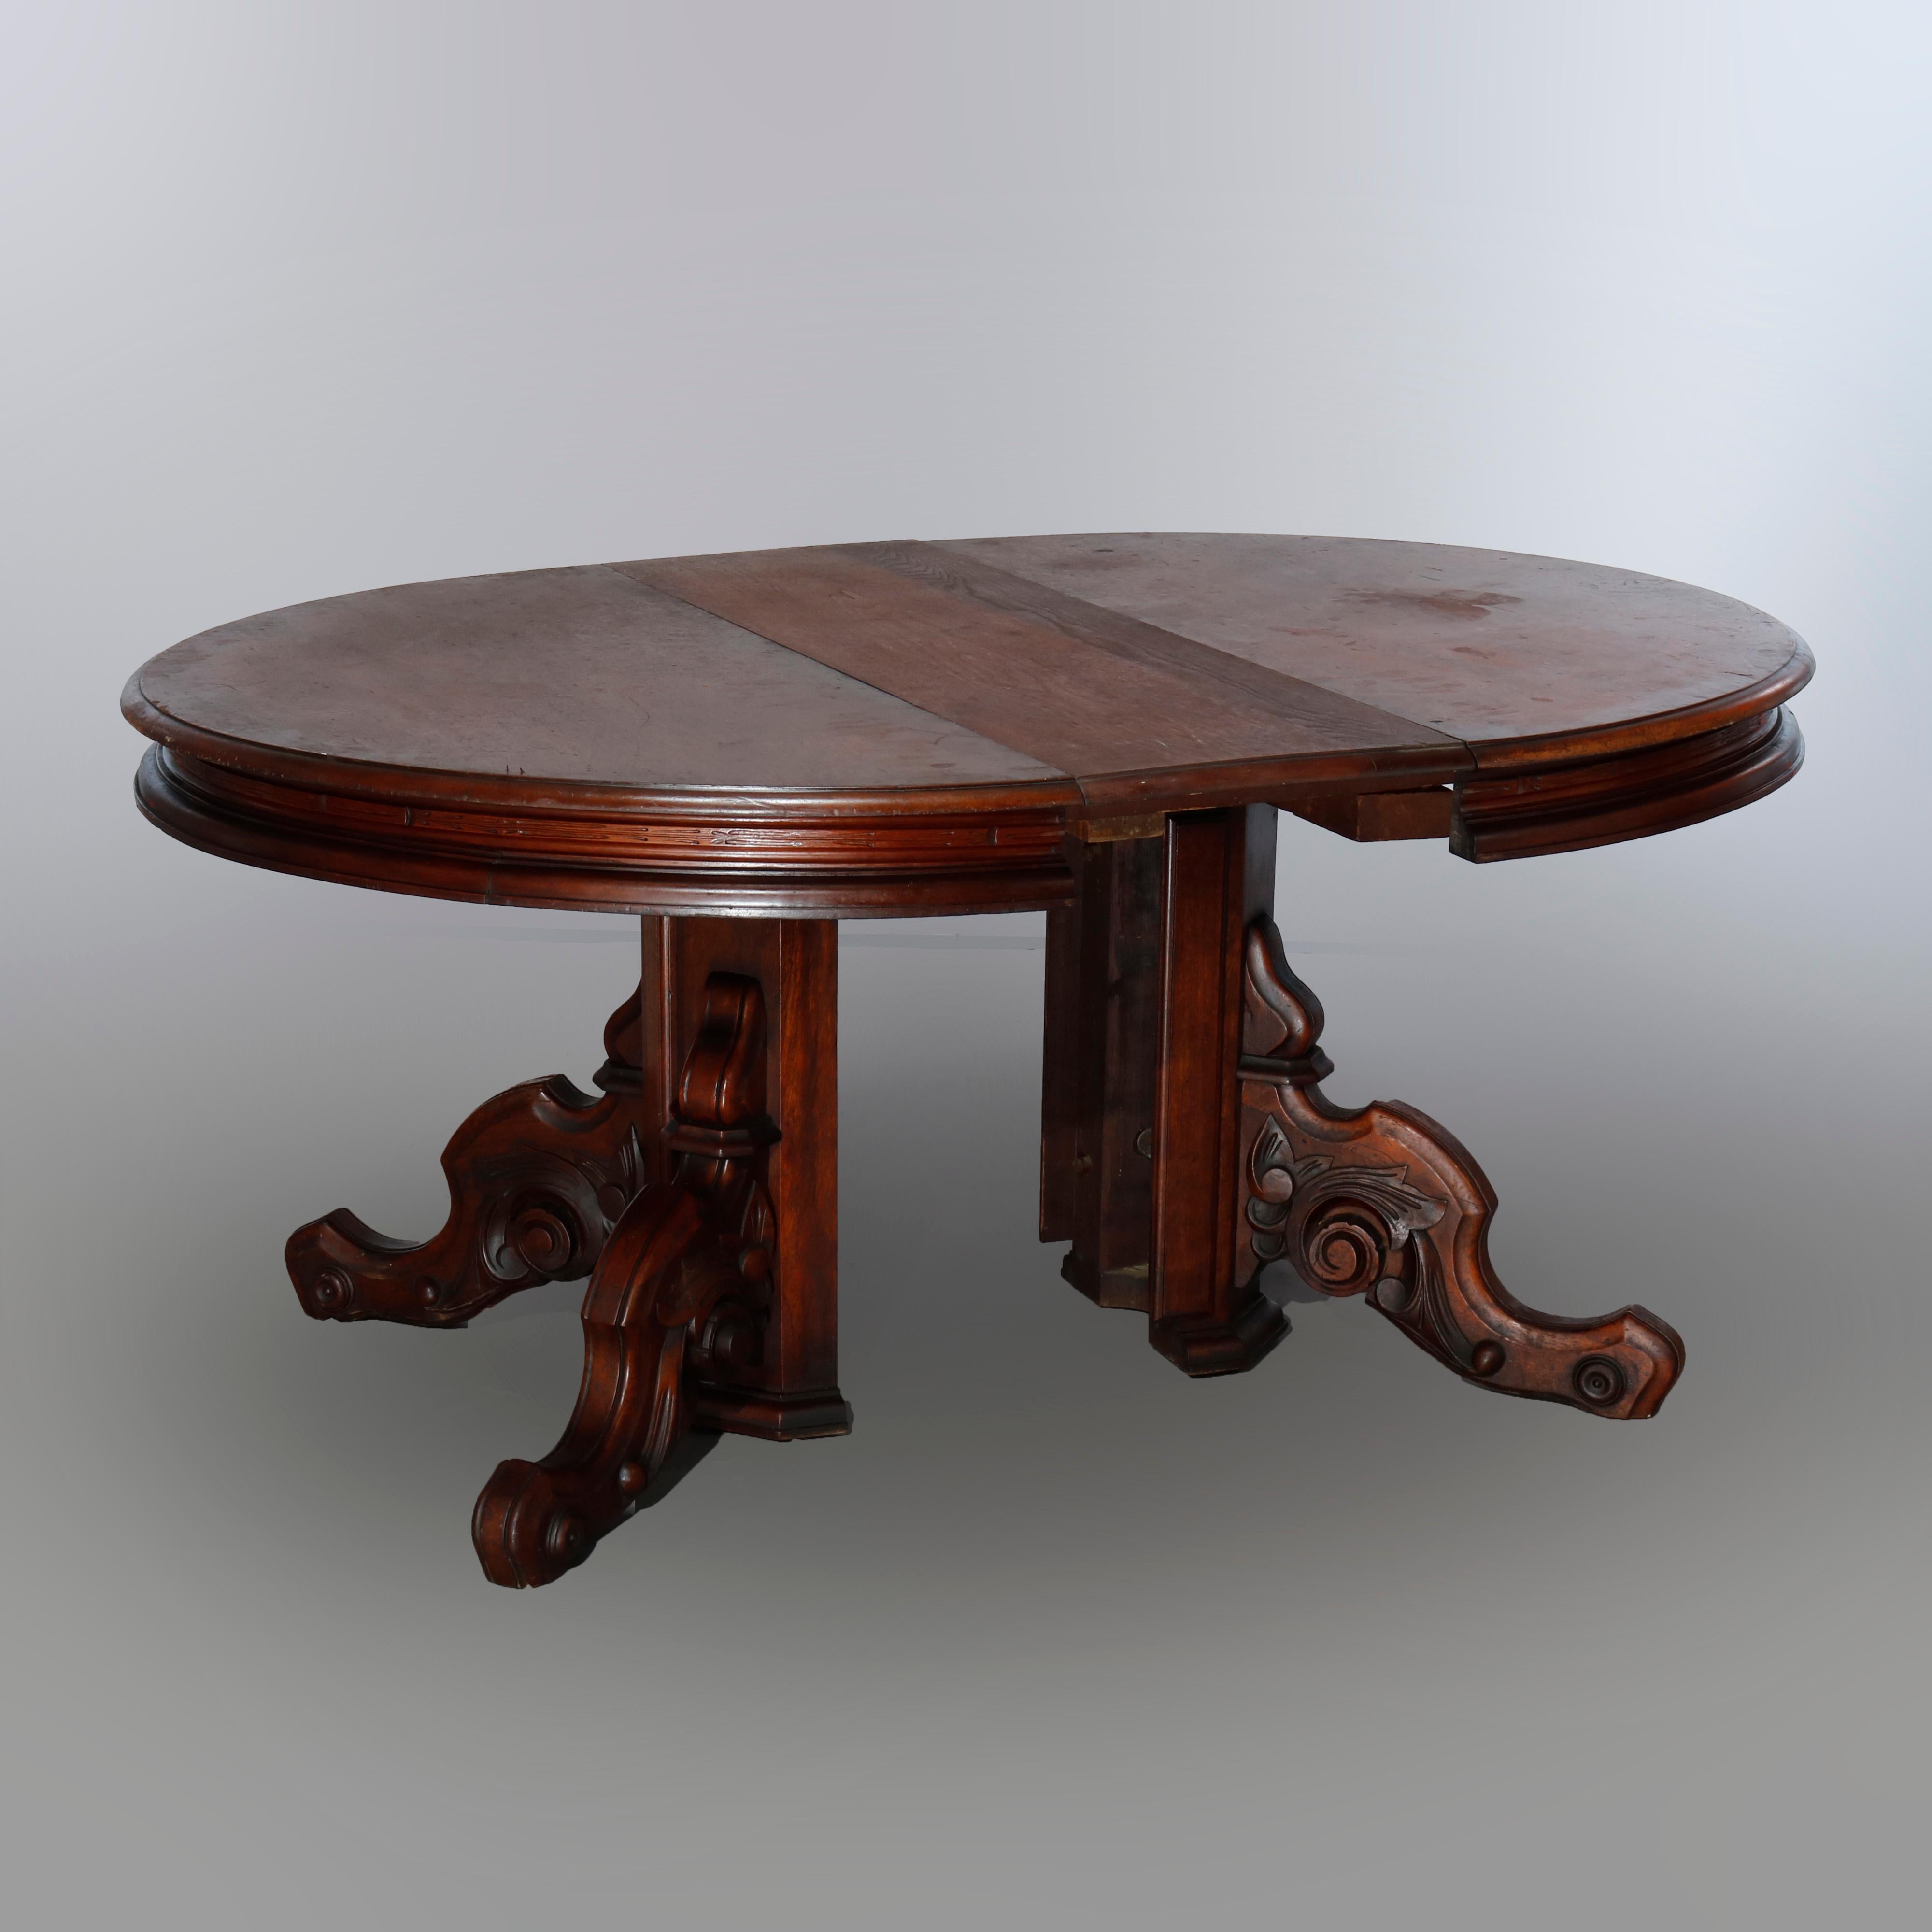 American Antique Renaissance Revival Carved Walnut Extension Dining Table & Leaves, c1880